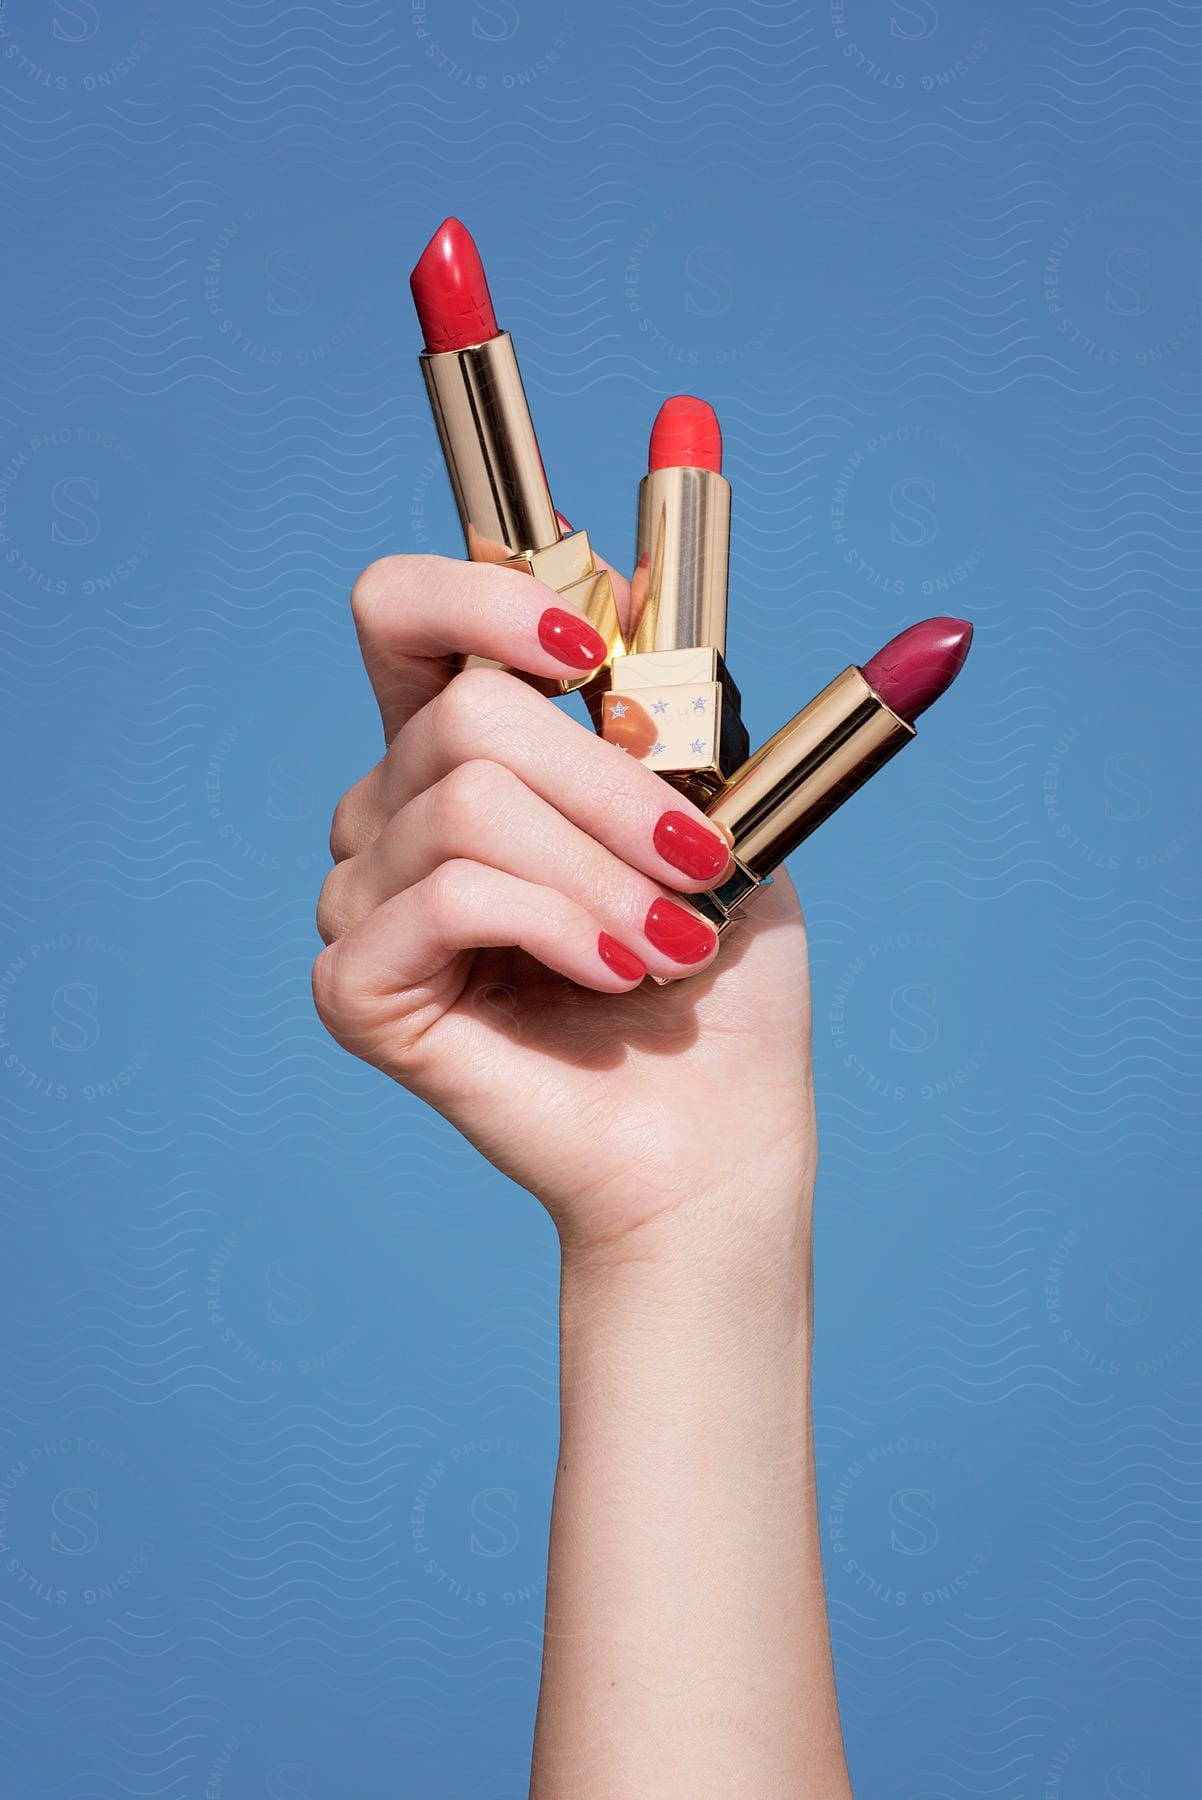 An arm holding three red lipsticks with gold packaging on a completely blue background.